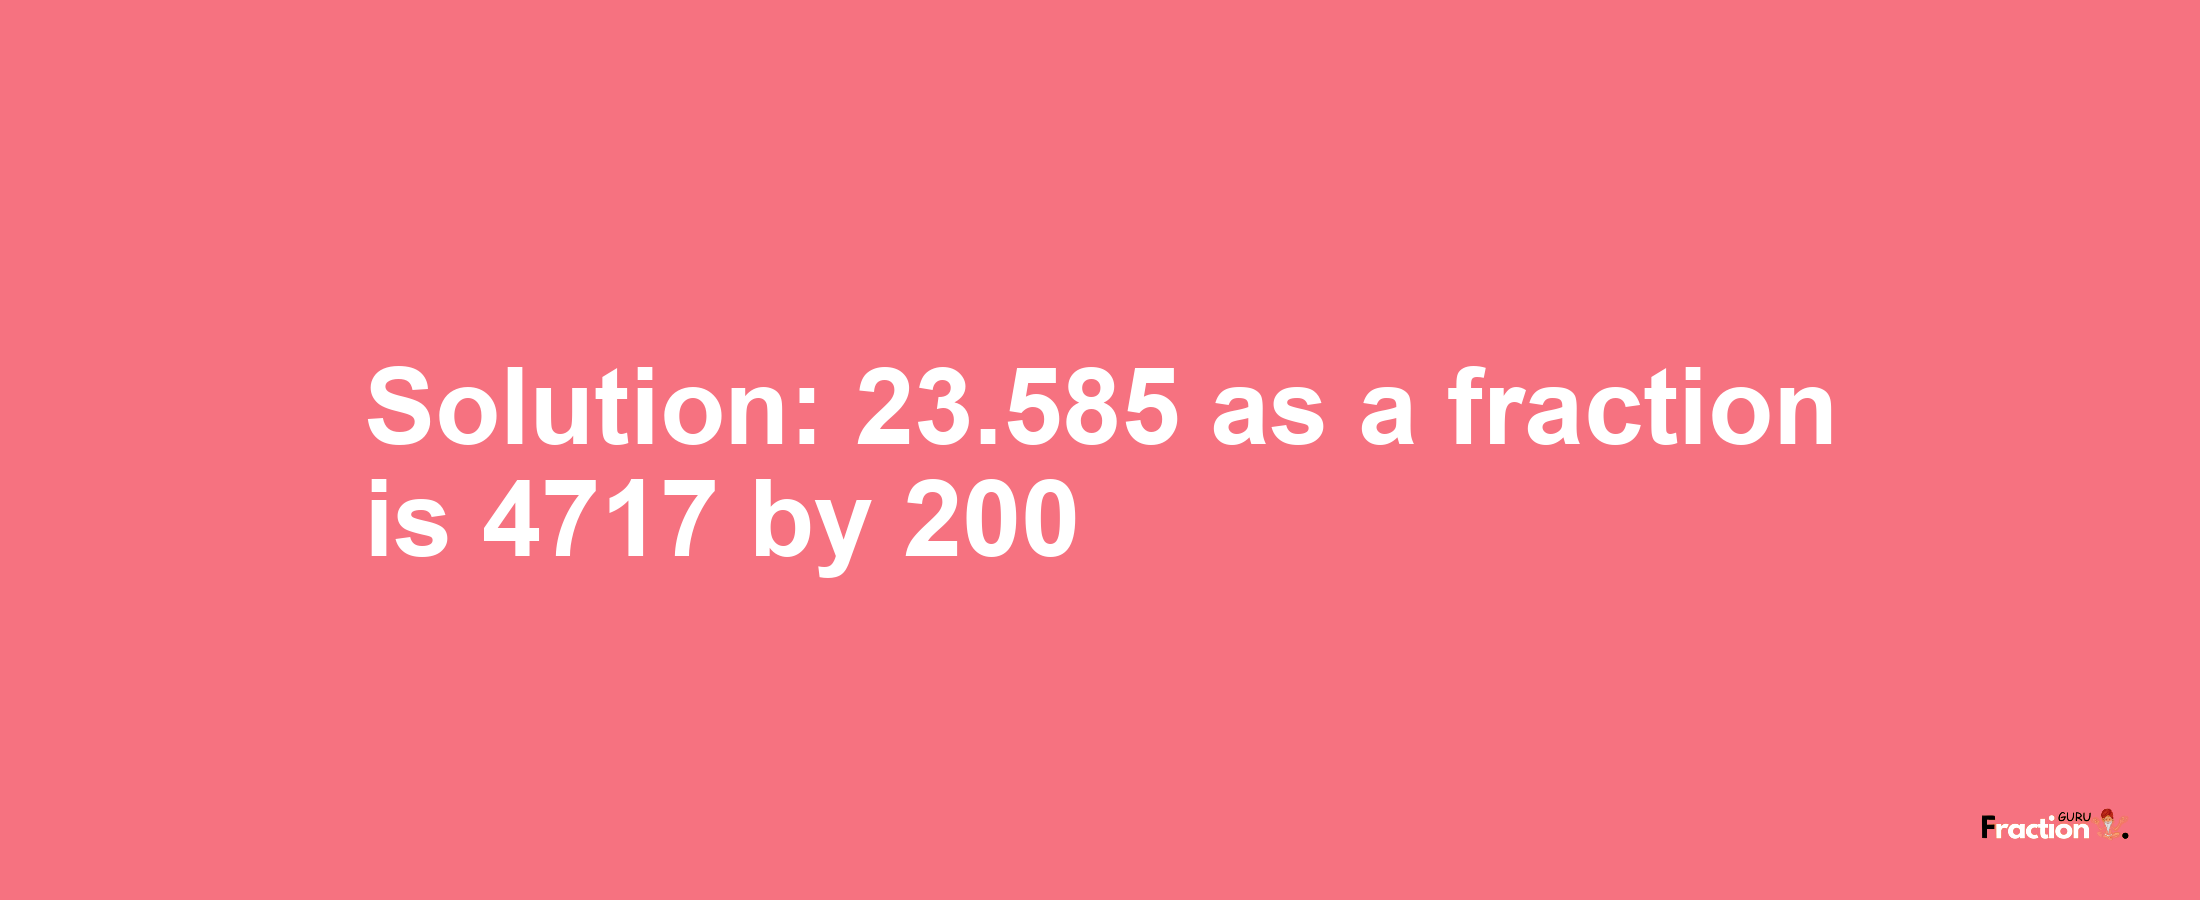 Solution:23.585 as a fraction is 4717/200